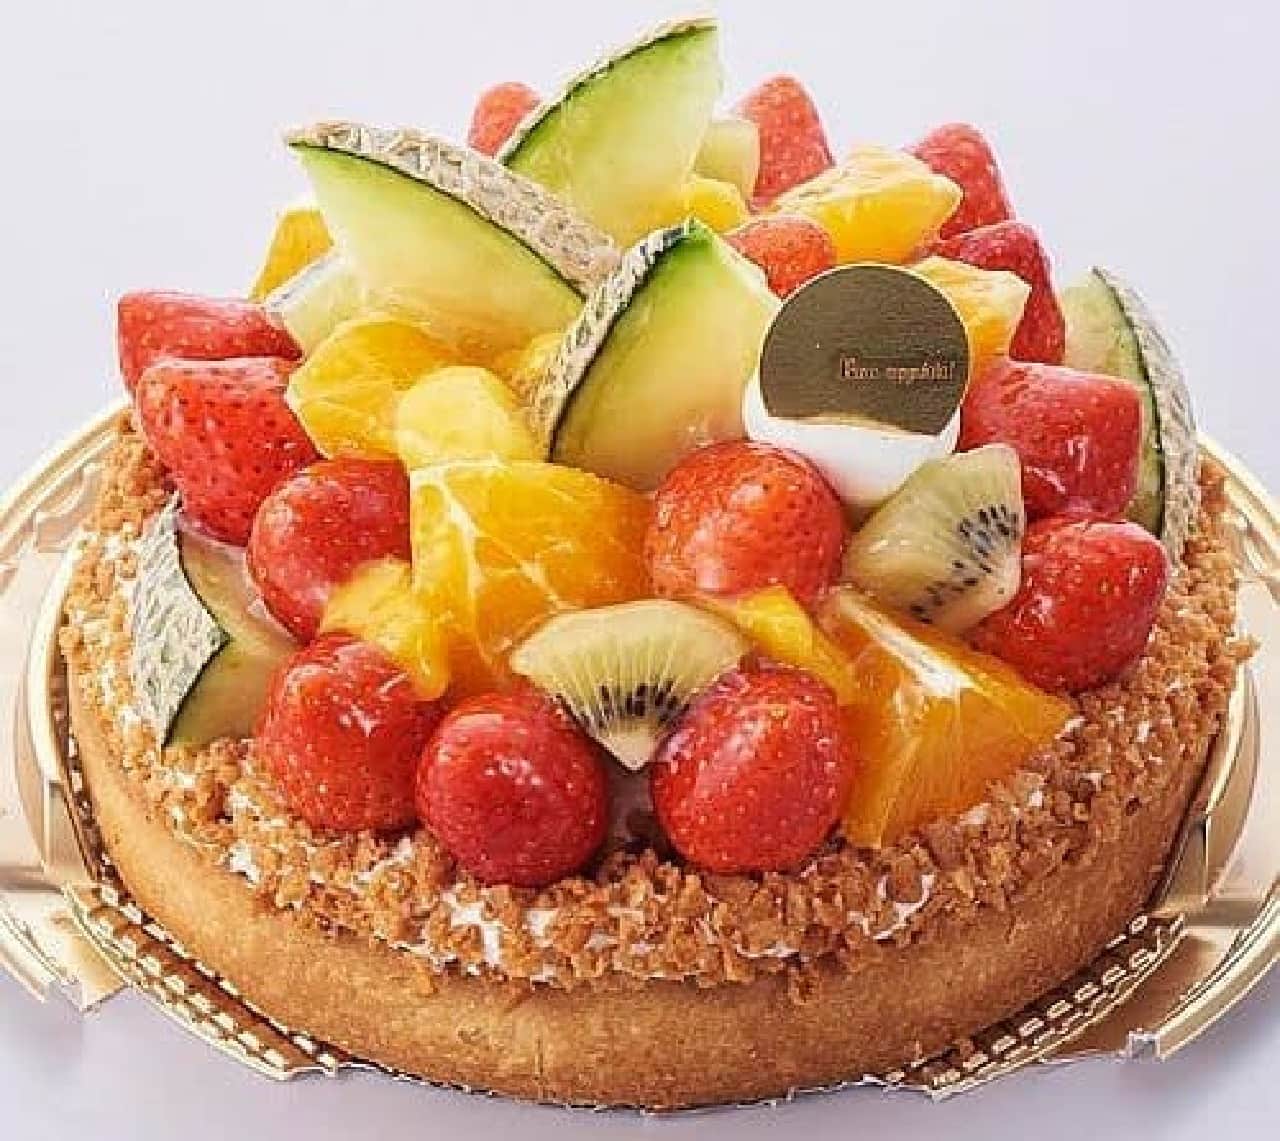 Chateraise "Coming-of-Age Day Fruit Tart Decoration"